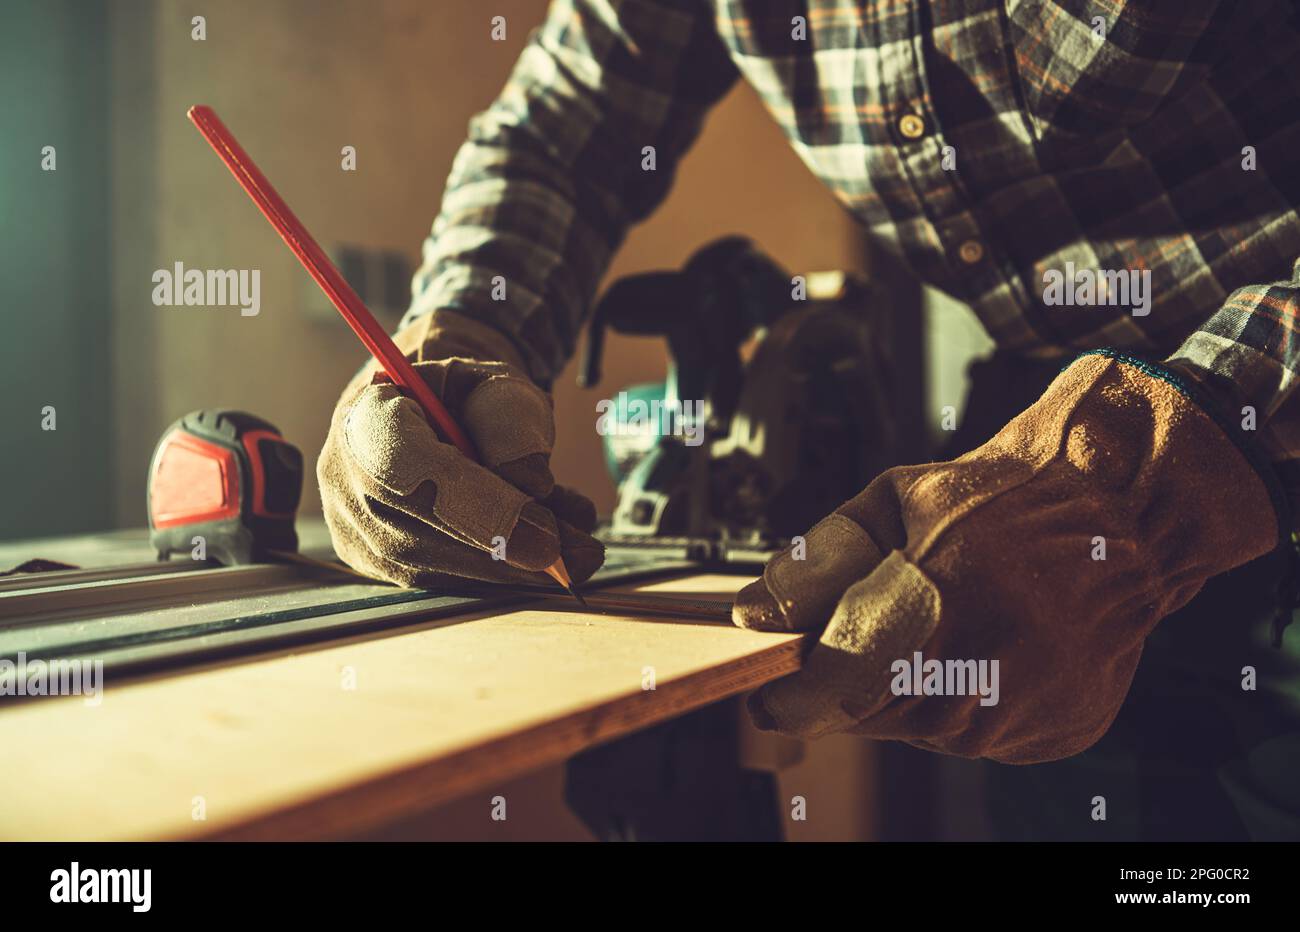 General Construction Worker Working on His Woodwork Project Inside a Small Shed. Stock Photo